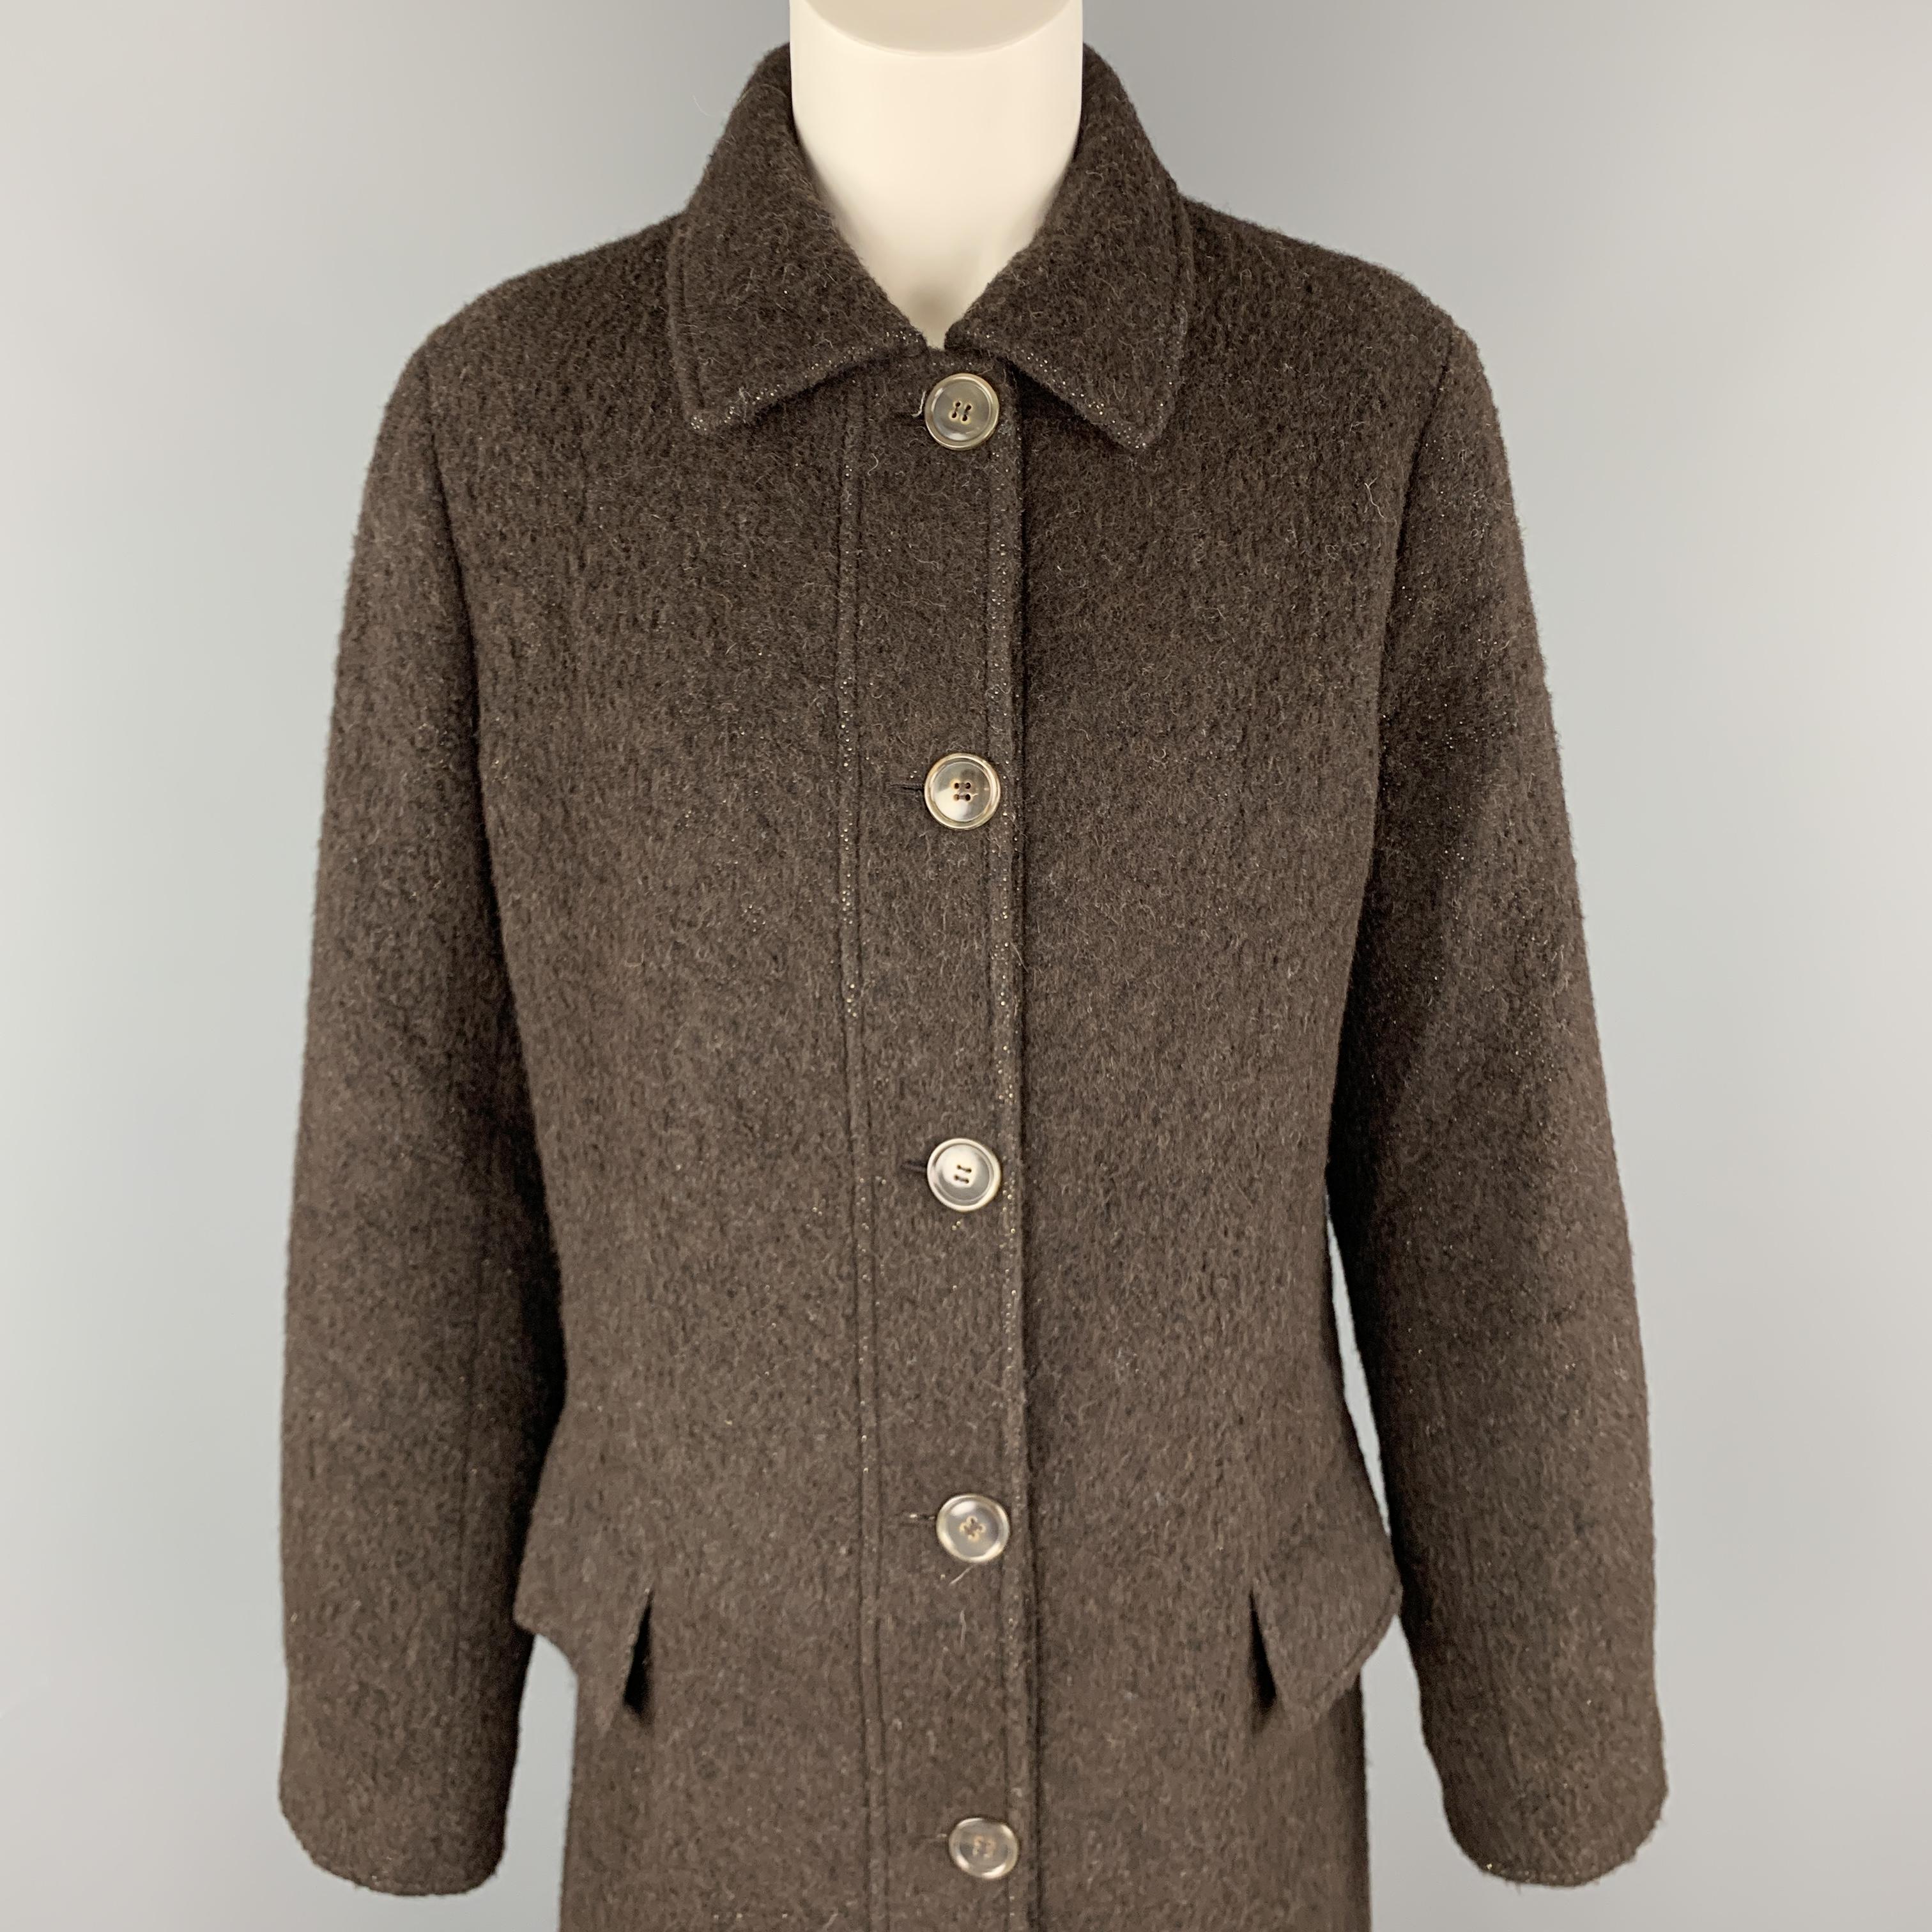 LUCIANO BARBERA coat comes in dark brown alpaca slightly sprakly fabric with a pointed collar, flap pockets, and single breasted button front. Made in Italy.

Excellent Pre-Owned Condition.
Marked: IT 44

Measurements:

Shoulder: 16 in.
Bust: 42